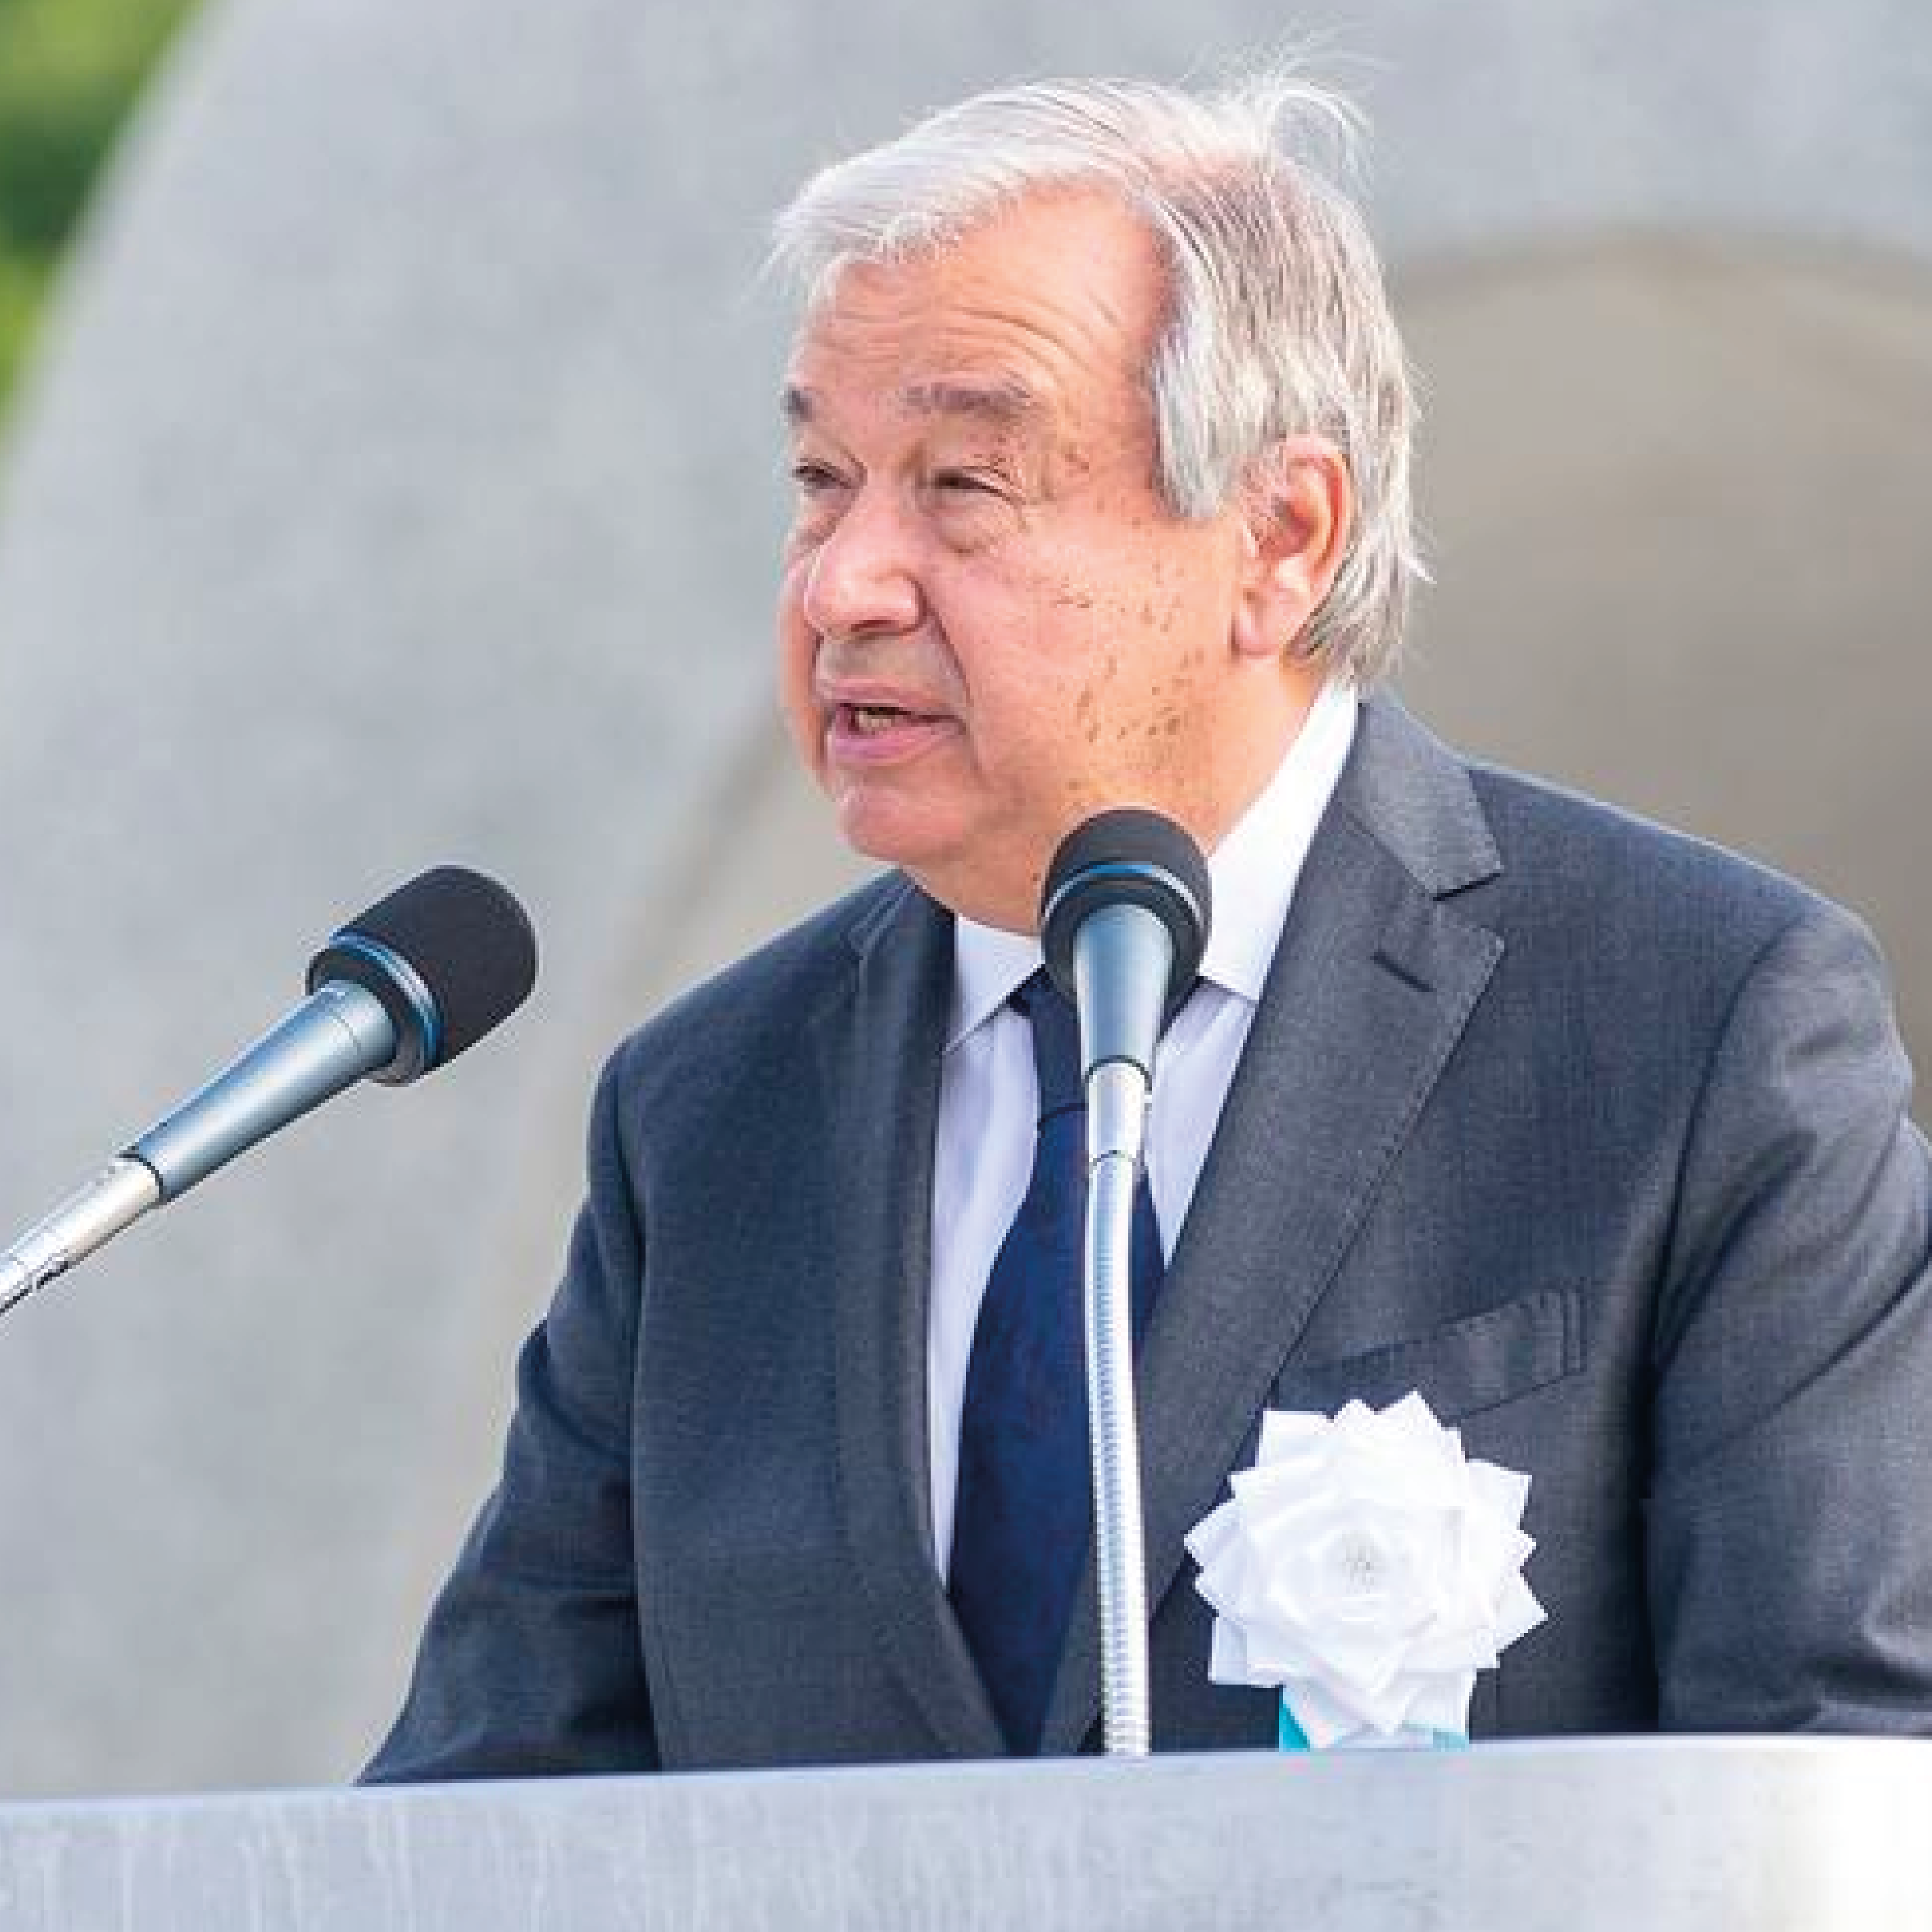 The Secretary-General António Guterres attends the Peace Memorial Ceremony in Hiroshima.